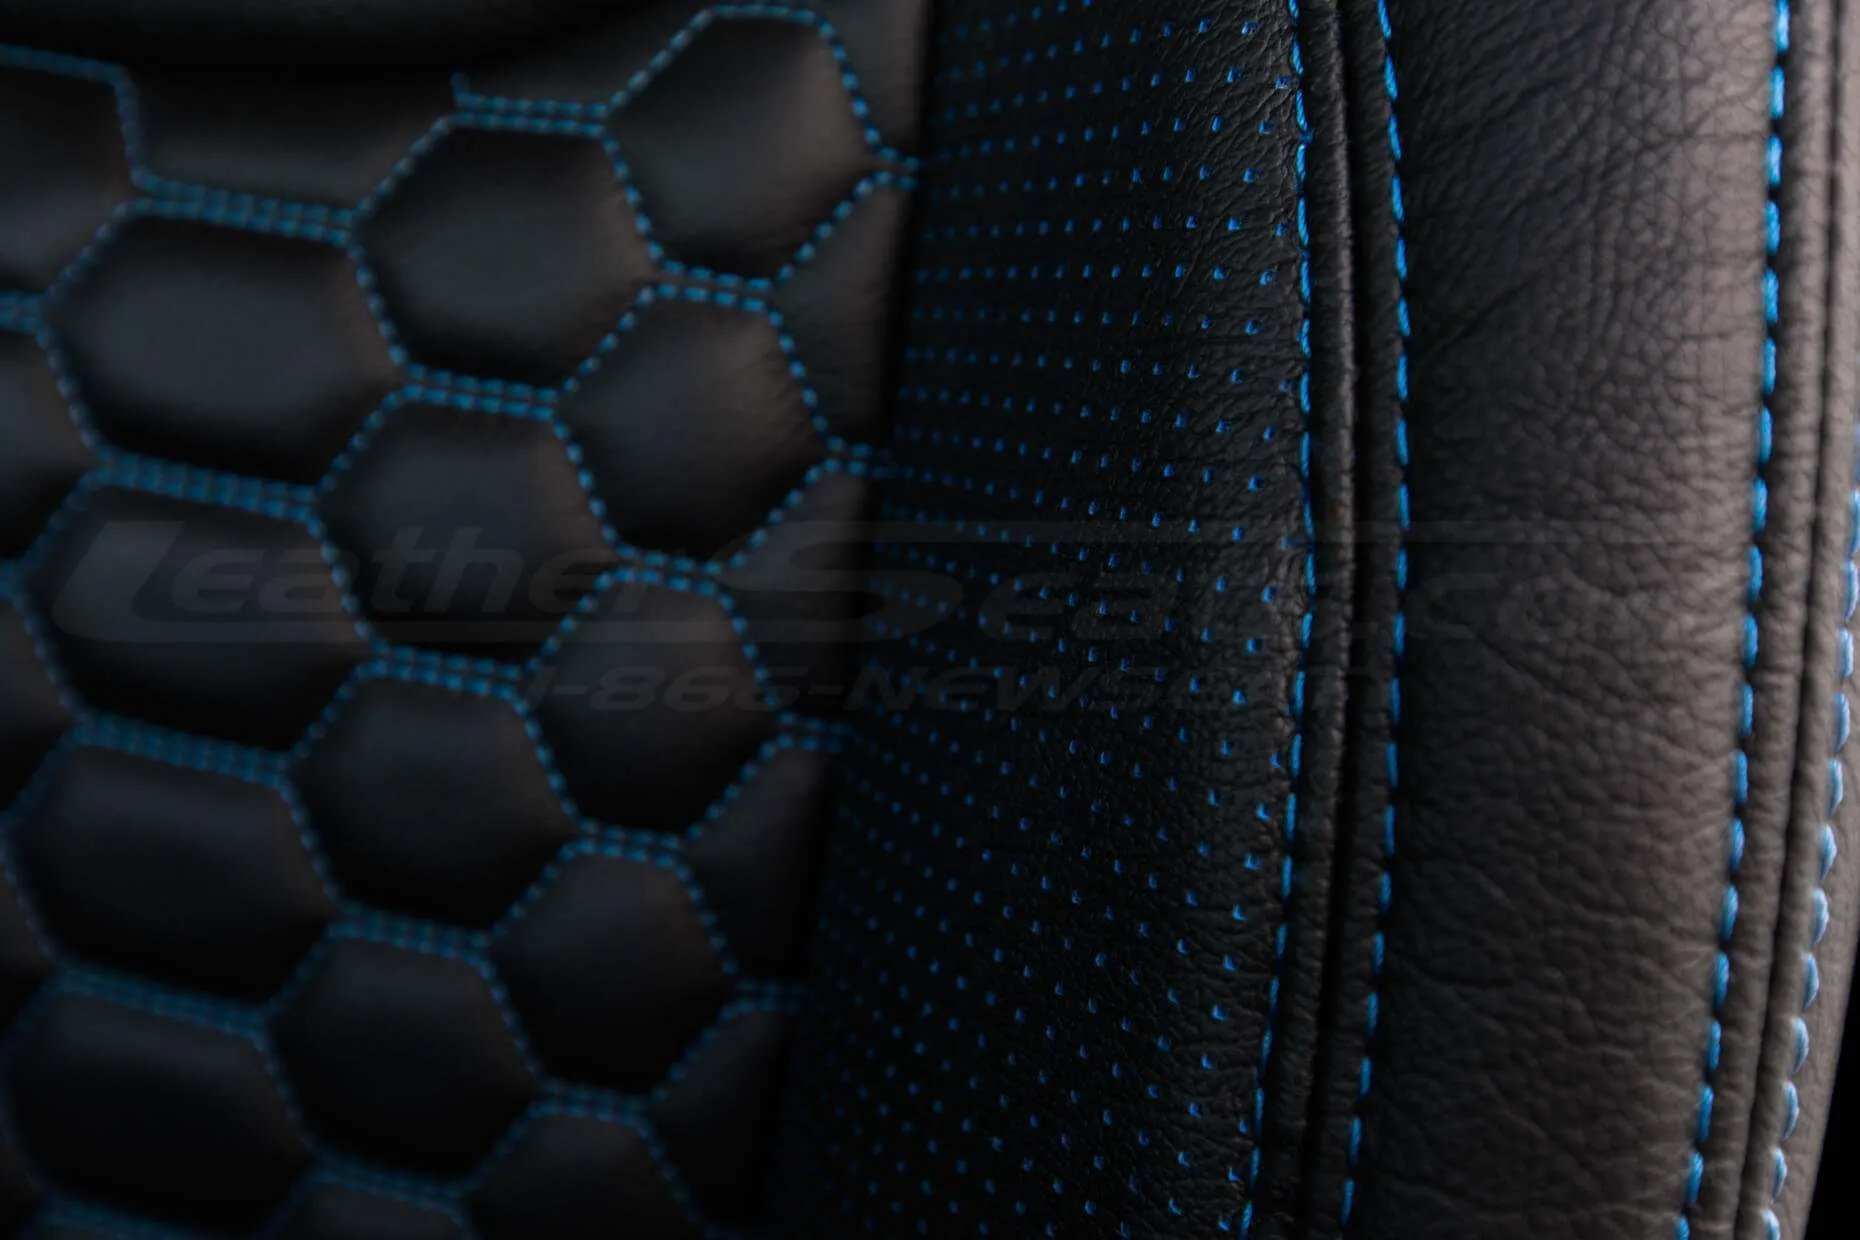 2013-2018 Jeep Wrangler Bespoked Leather Seats Installed- Black & Cobalt - Piazza blue wings and reticulated hex insert